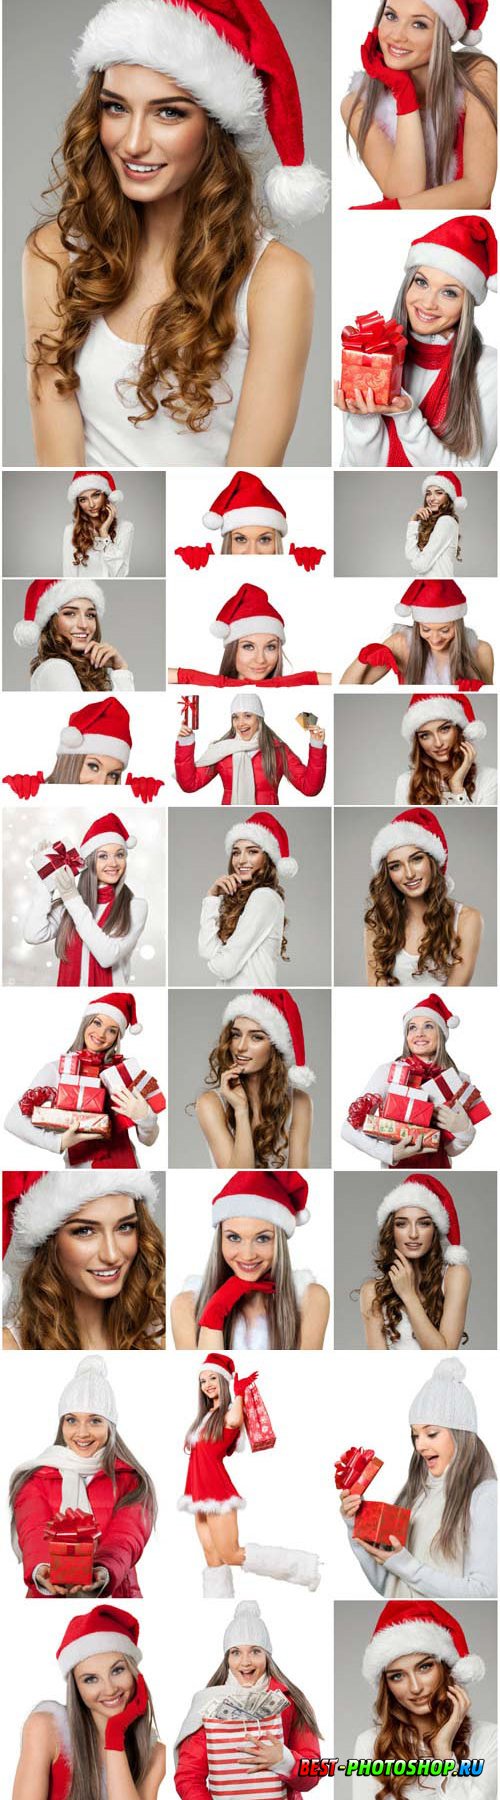 New Year and Christmas stock photos 59